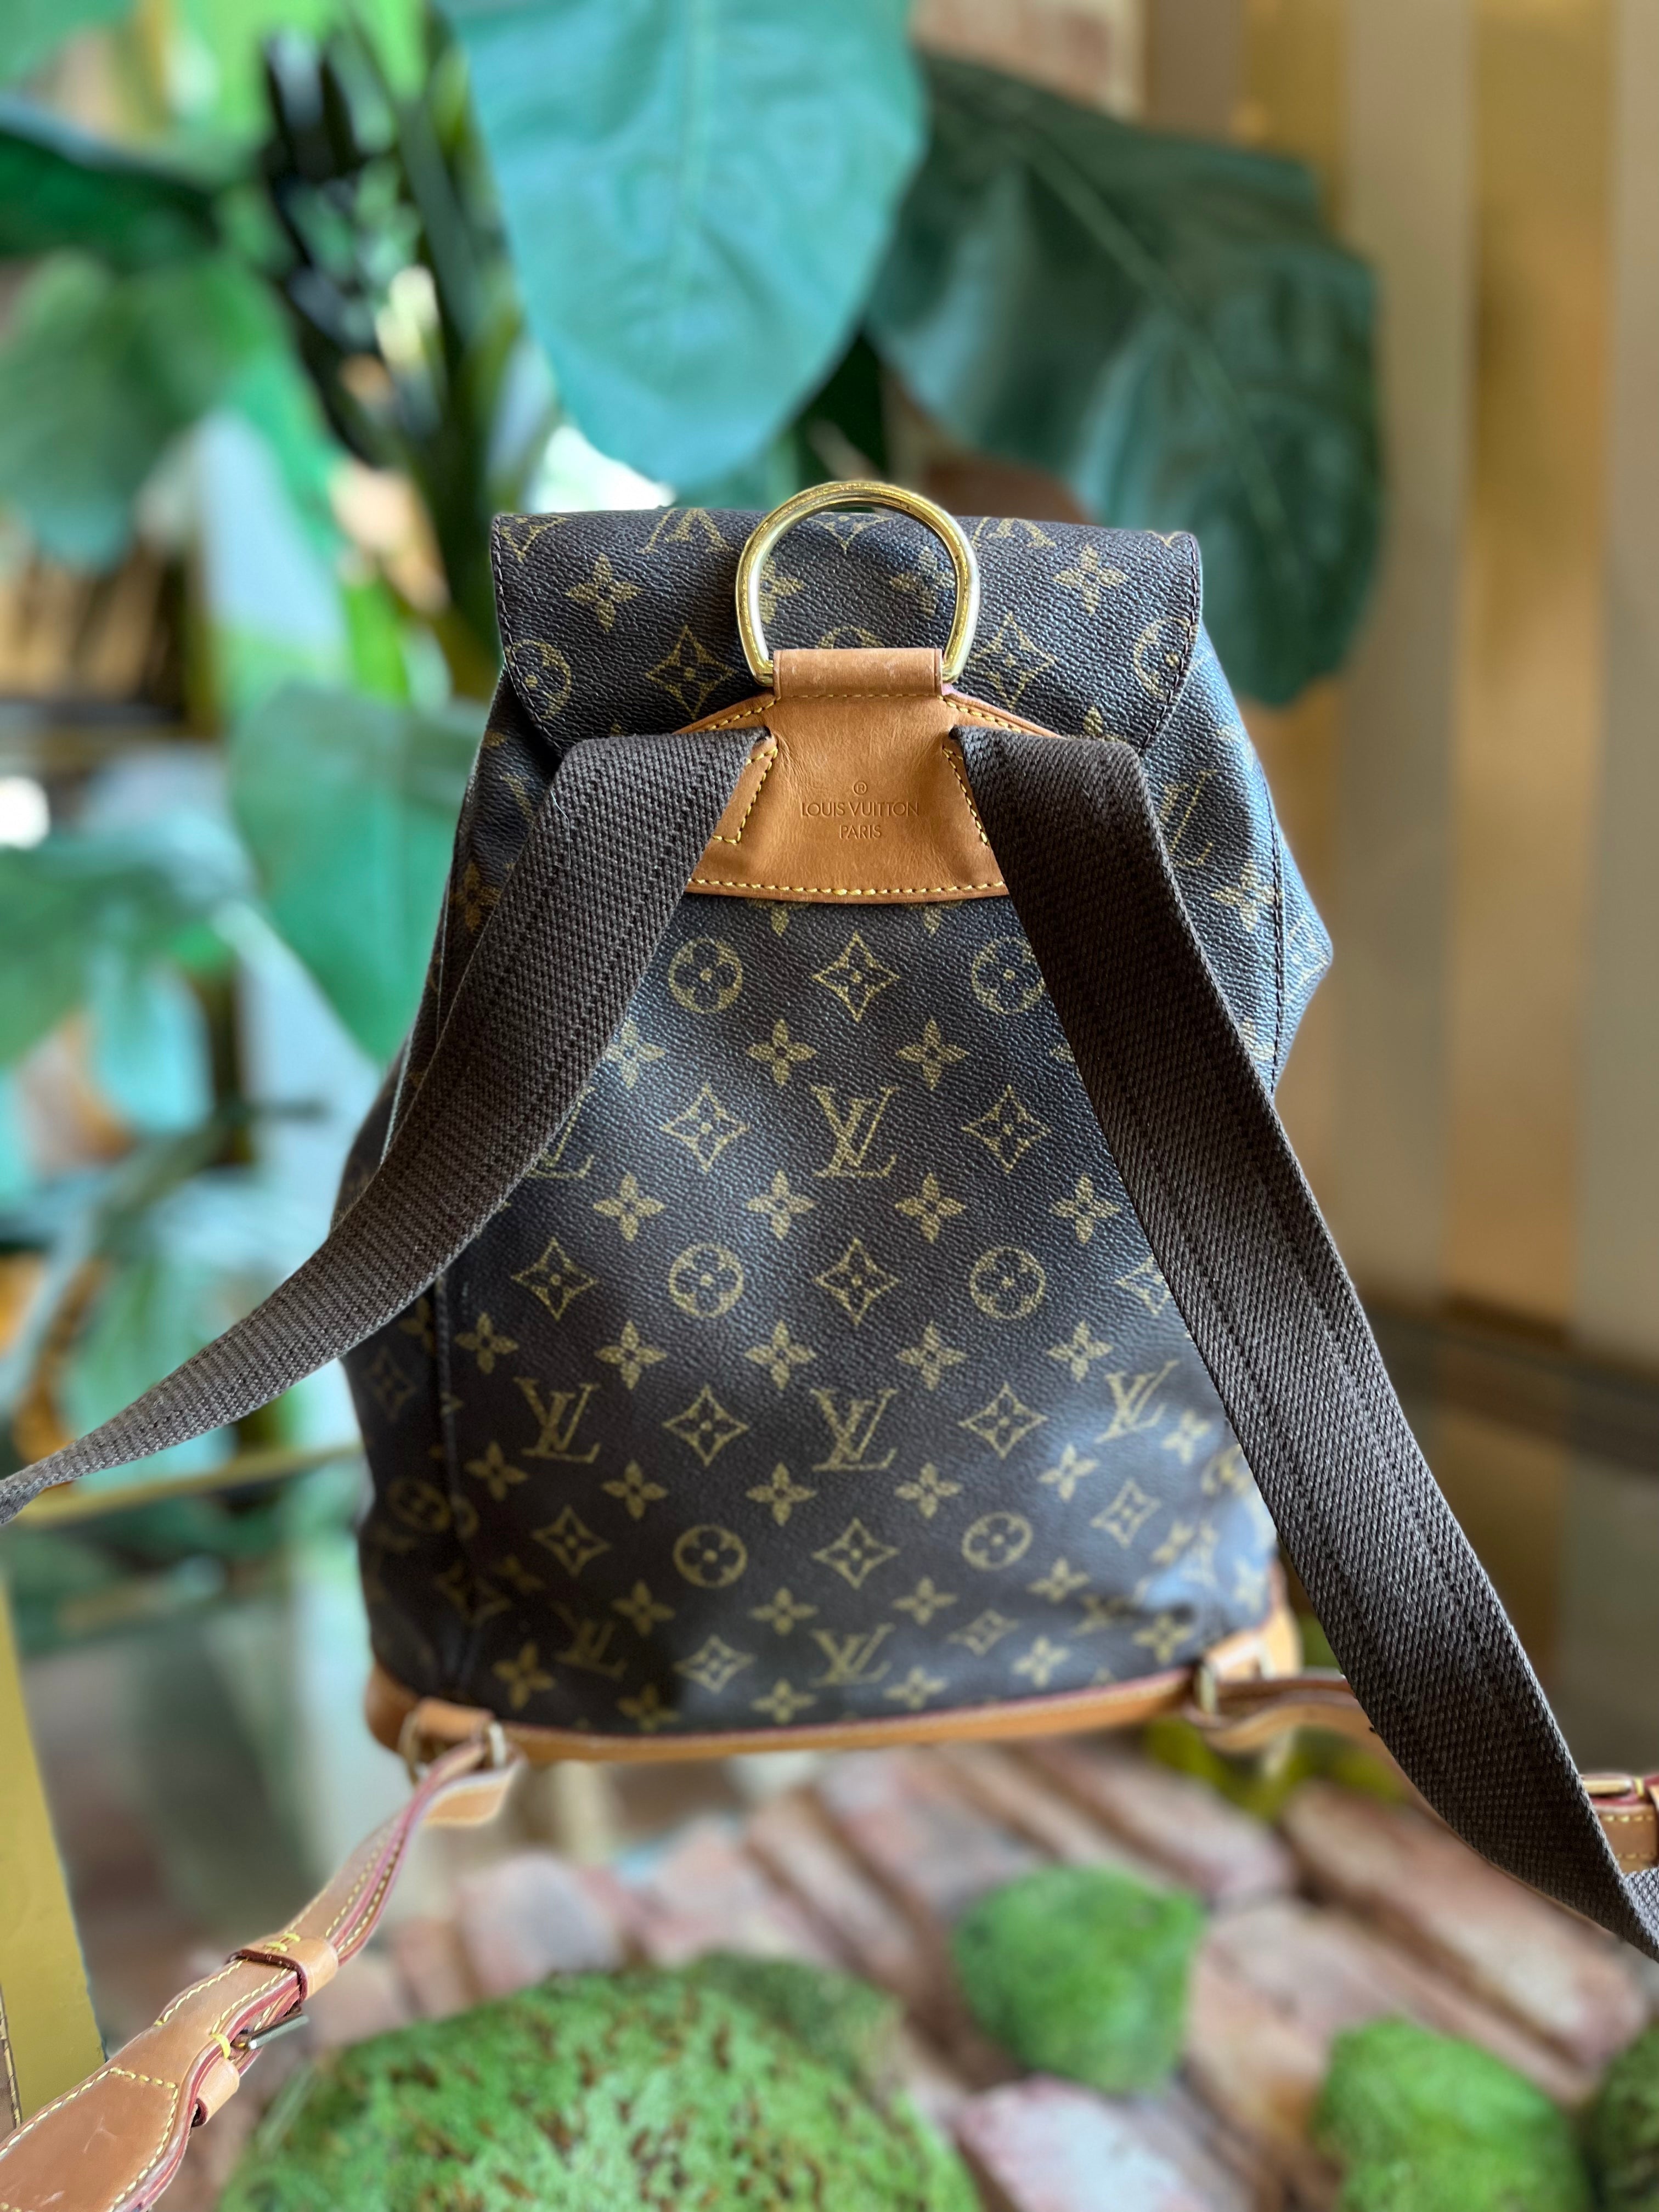 how to tell if louis vuitton backpack is real